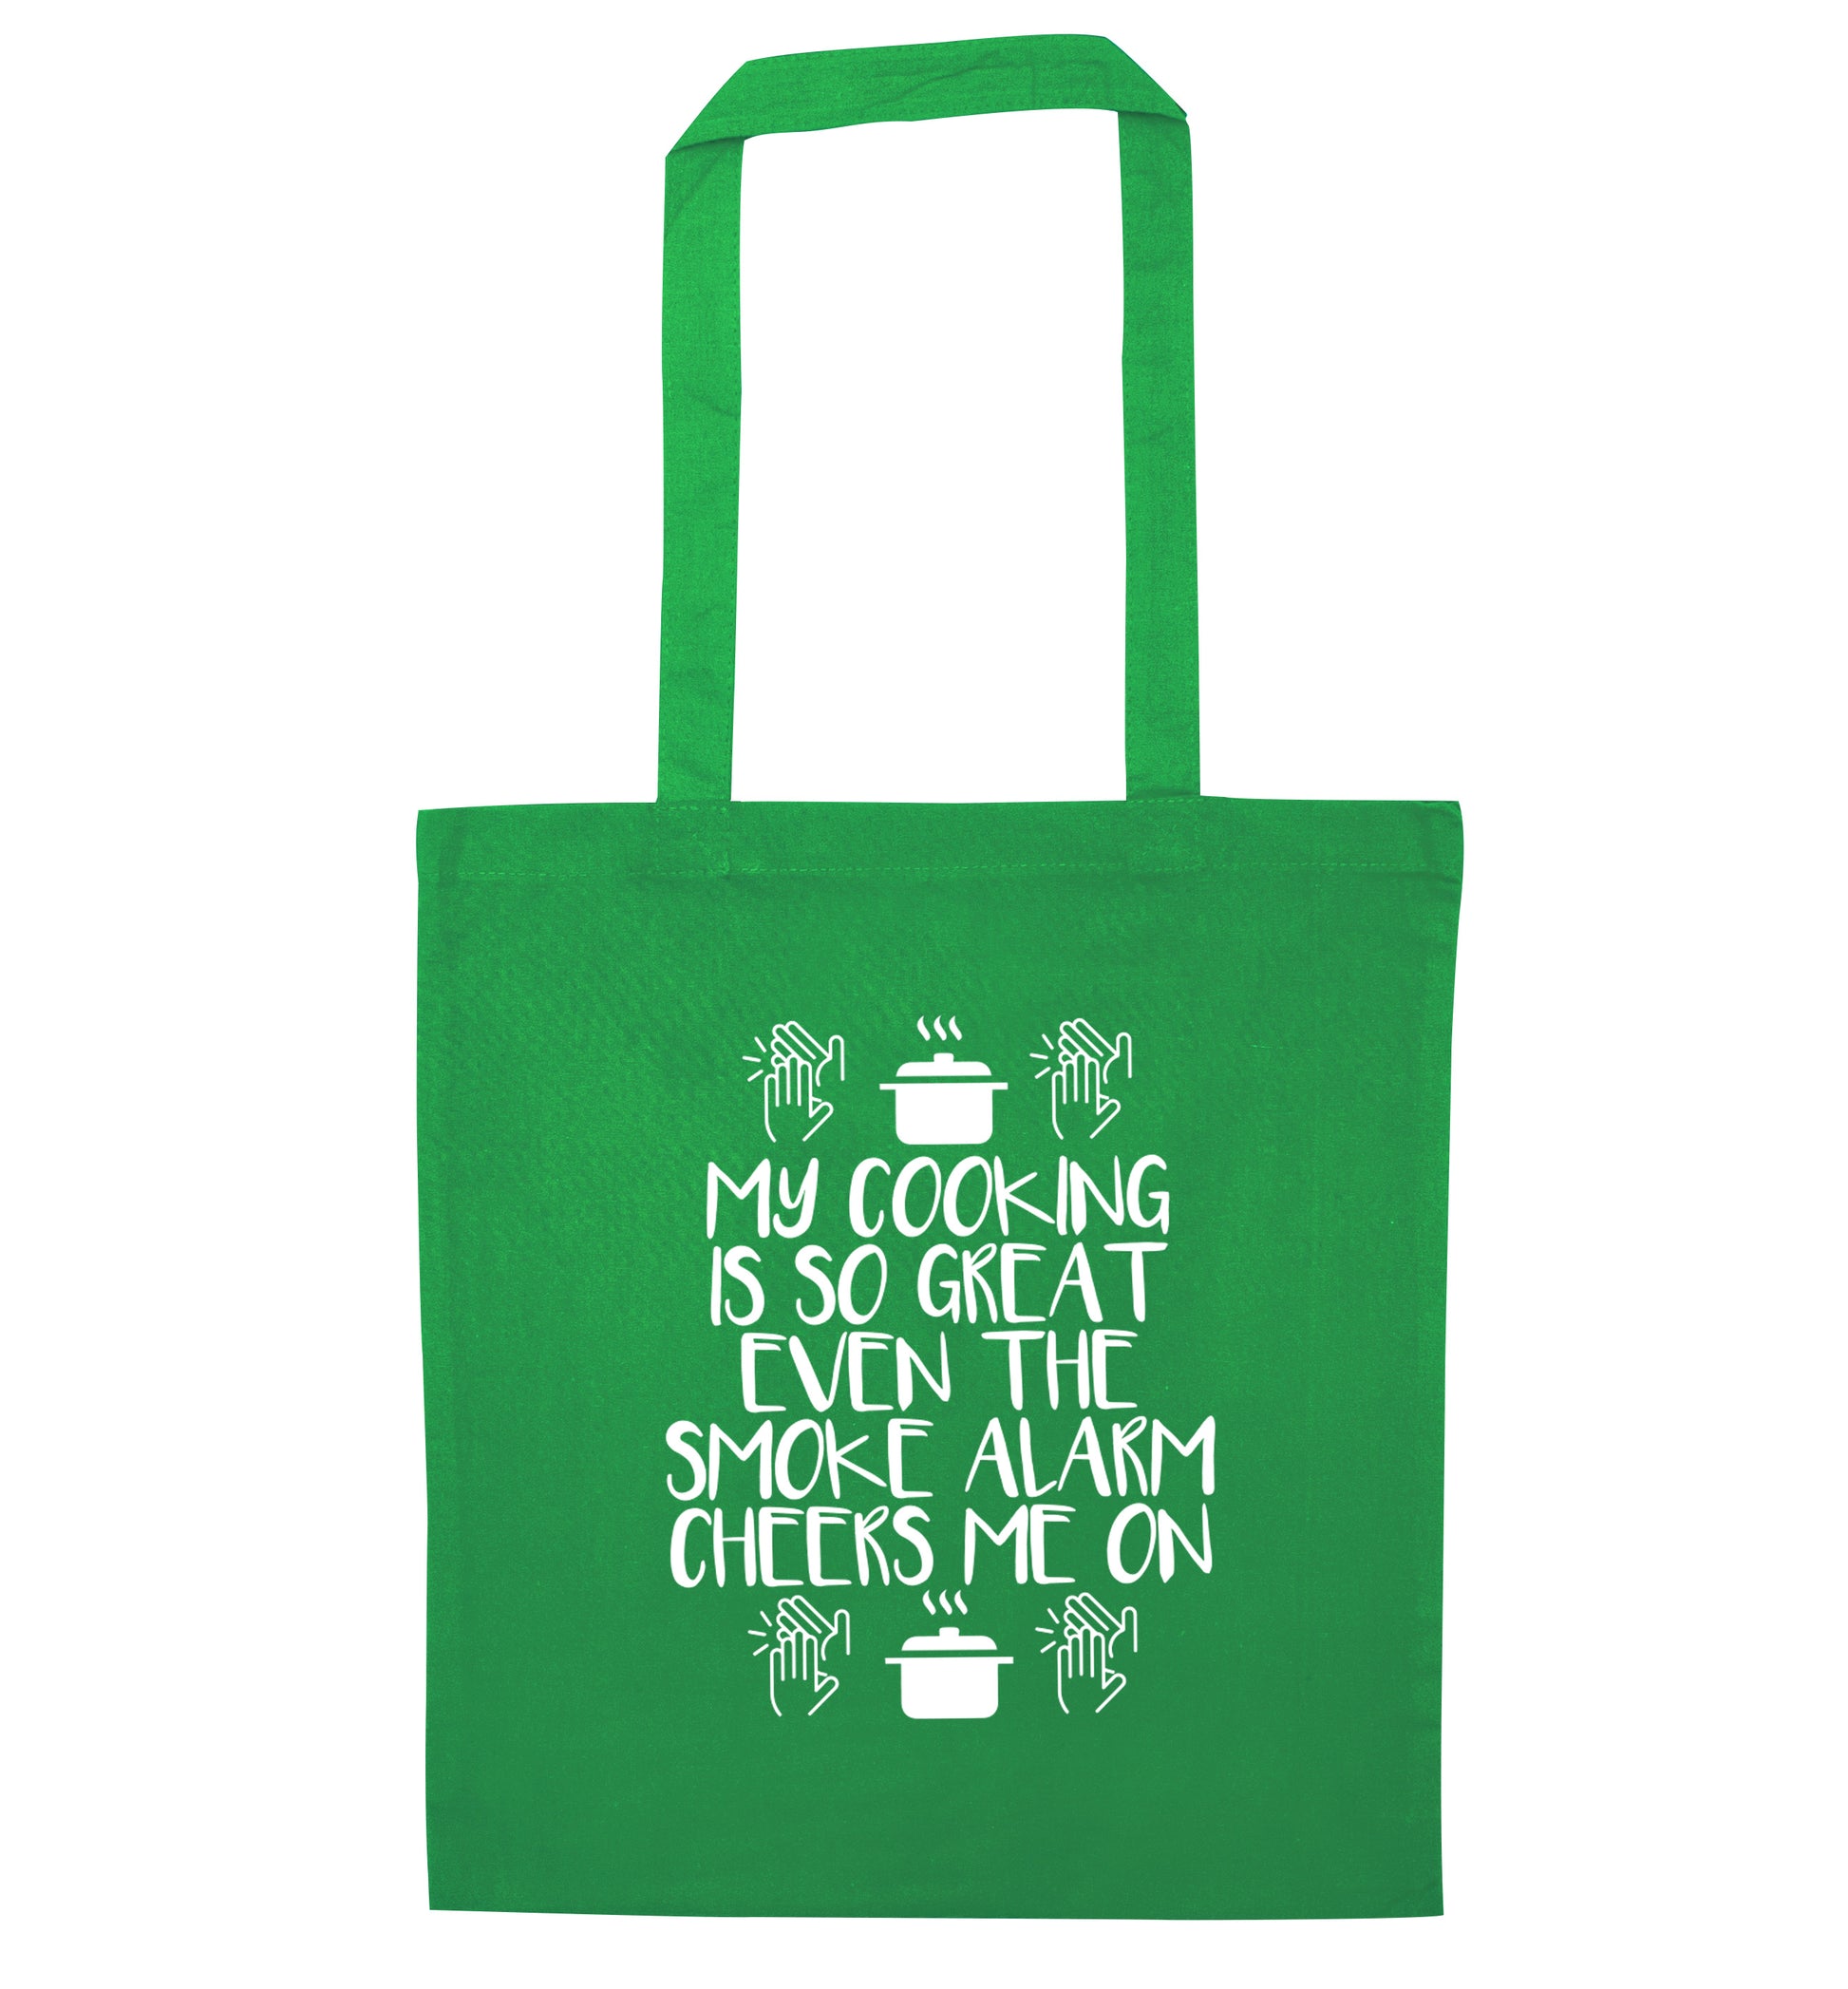 My cooking is so great even the smoke alarm cheers me on! green tote bag